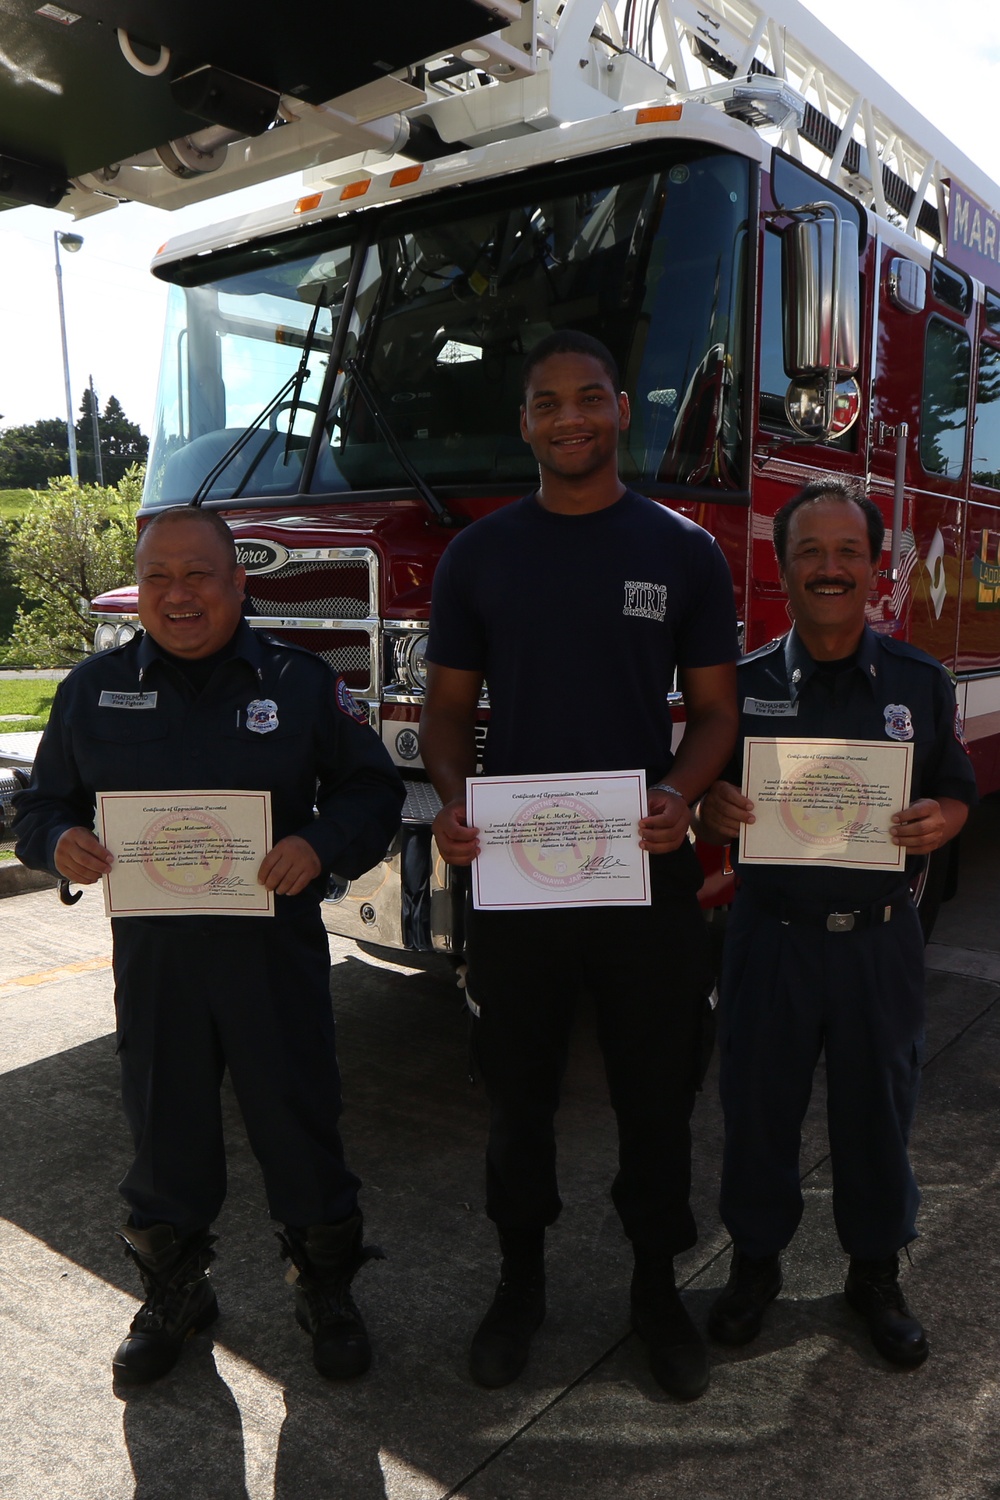 Camp Courtney Fire Department awarded for delivering baby